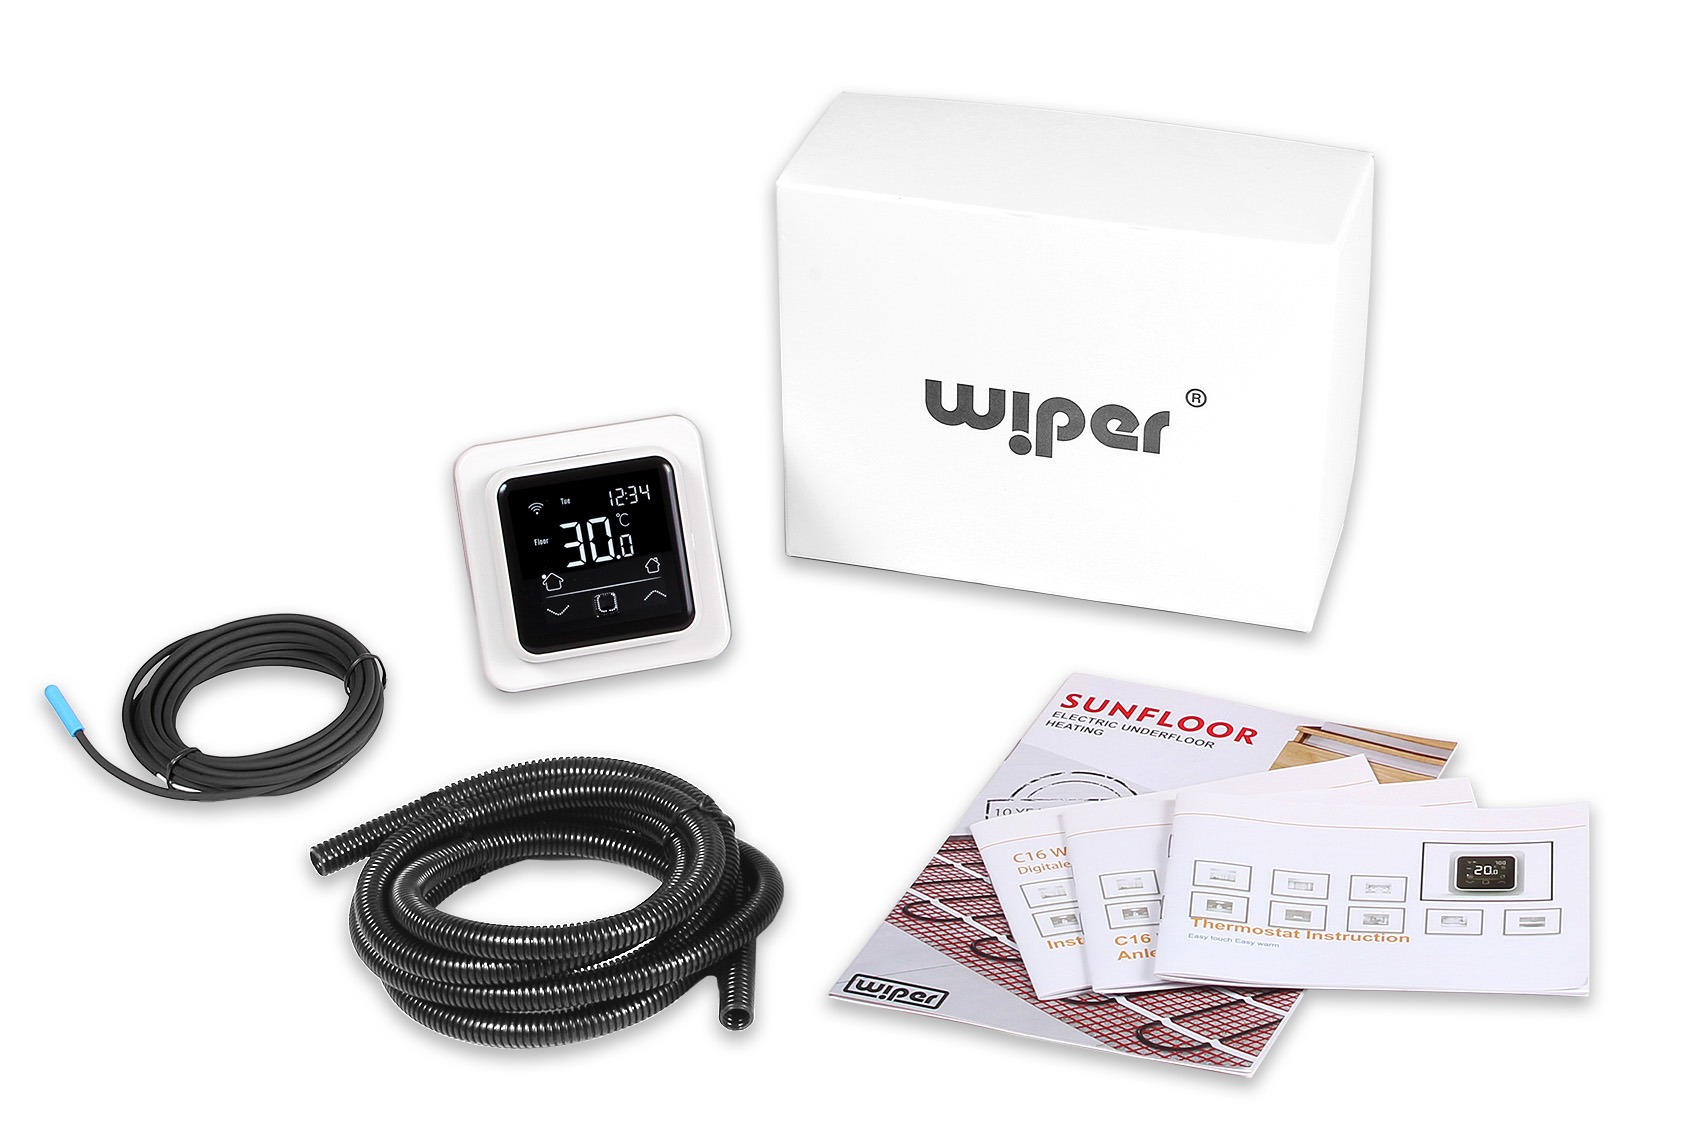 INSTALLATION AND MAIN FUNCTIONS OF WIPER SUNFLOOR WIFI THERMOSTAT